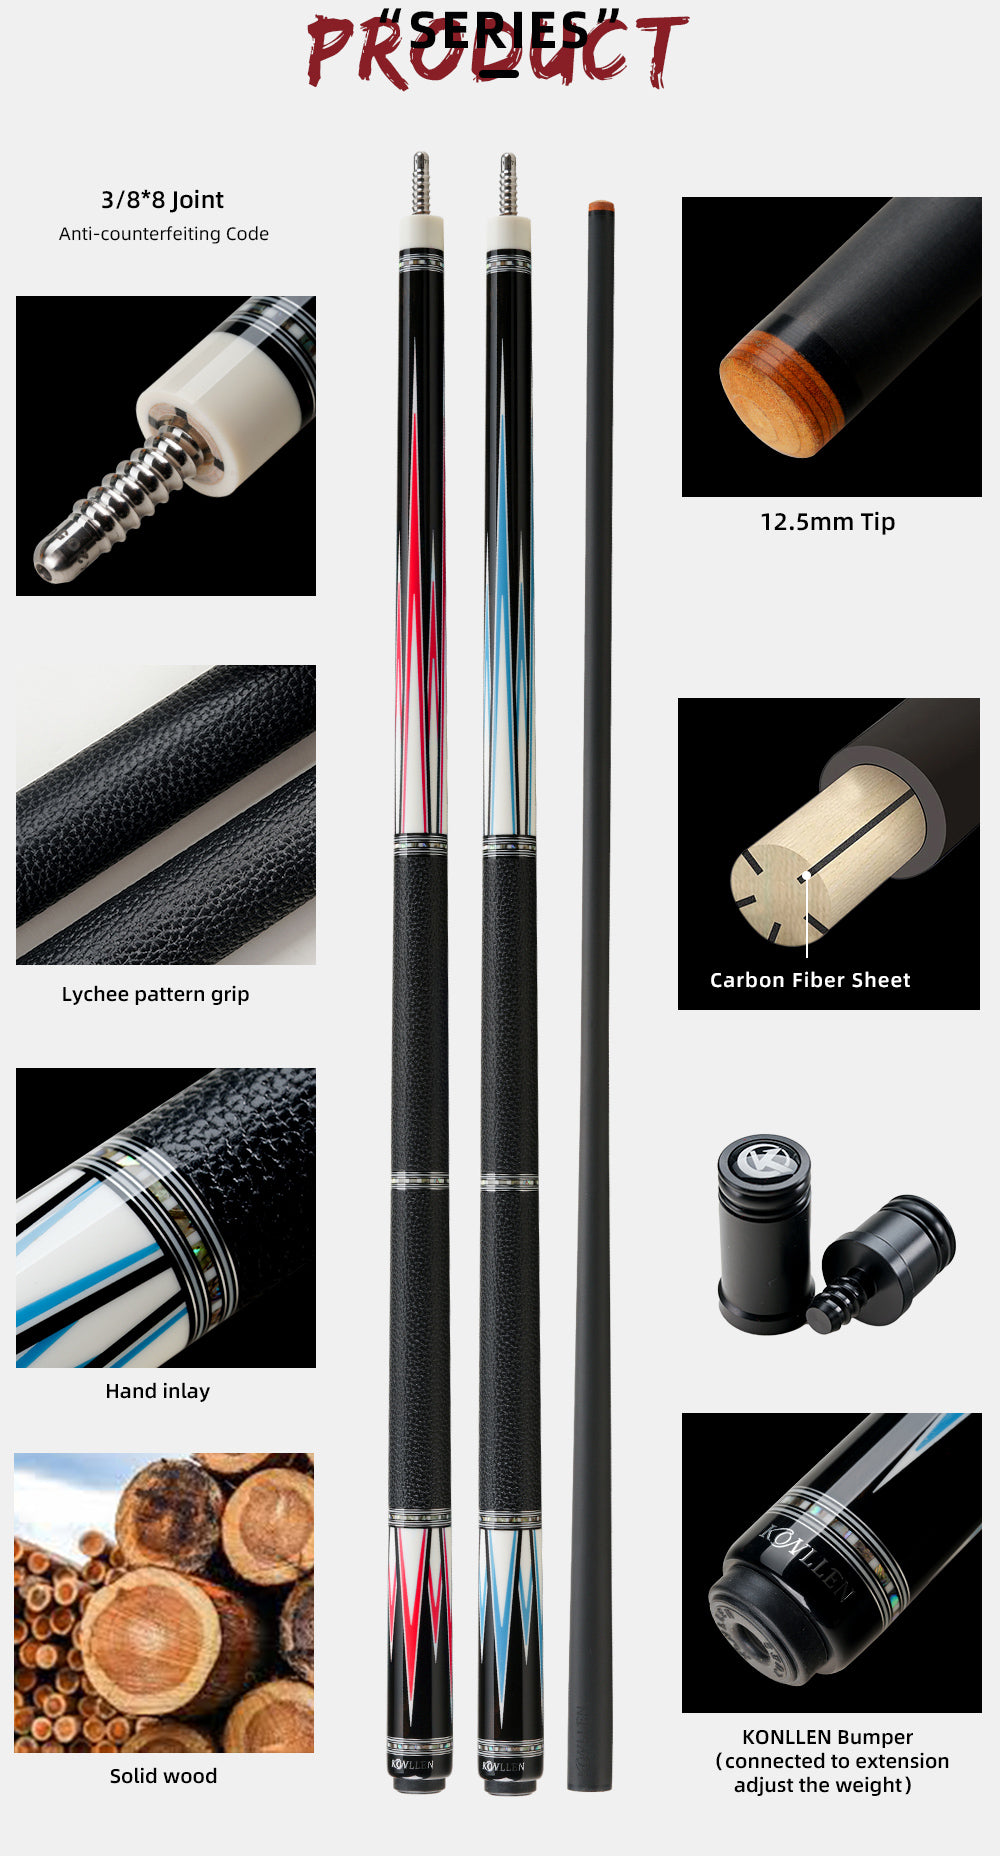 KONLLEN-Upgrade Carbon Fiber Pool Cue Stick, Real Inlay Billiard Cue, 12.5mm Tip, Low Deflection Technology, Shaft Abalone